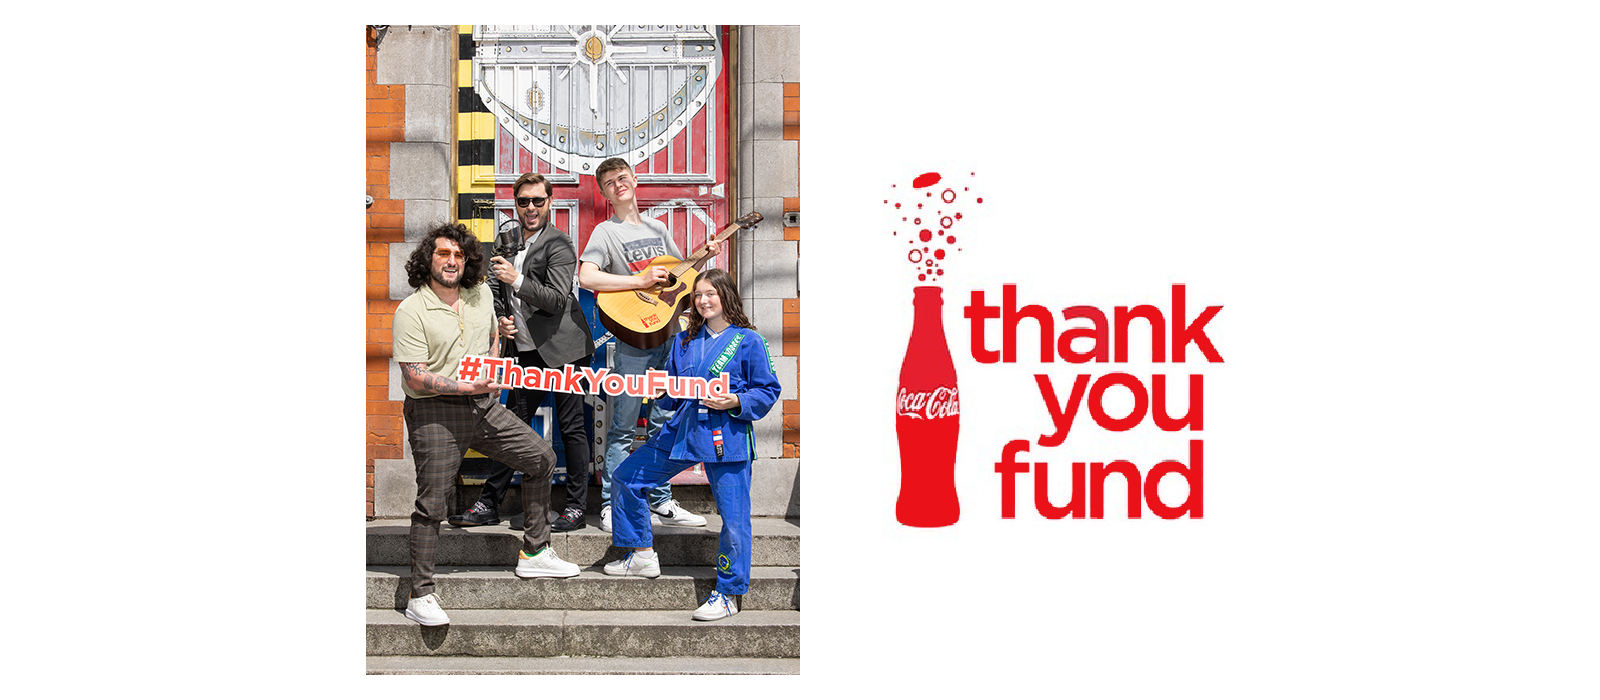 Band of four members with their instruments posing for a photograph in front of a building holding a 'Thank you fund' sign